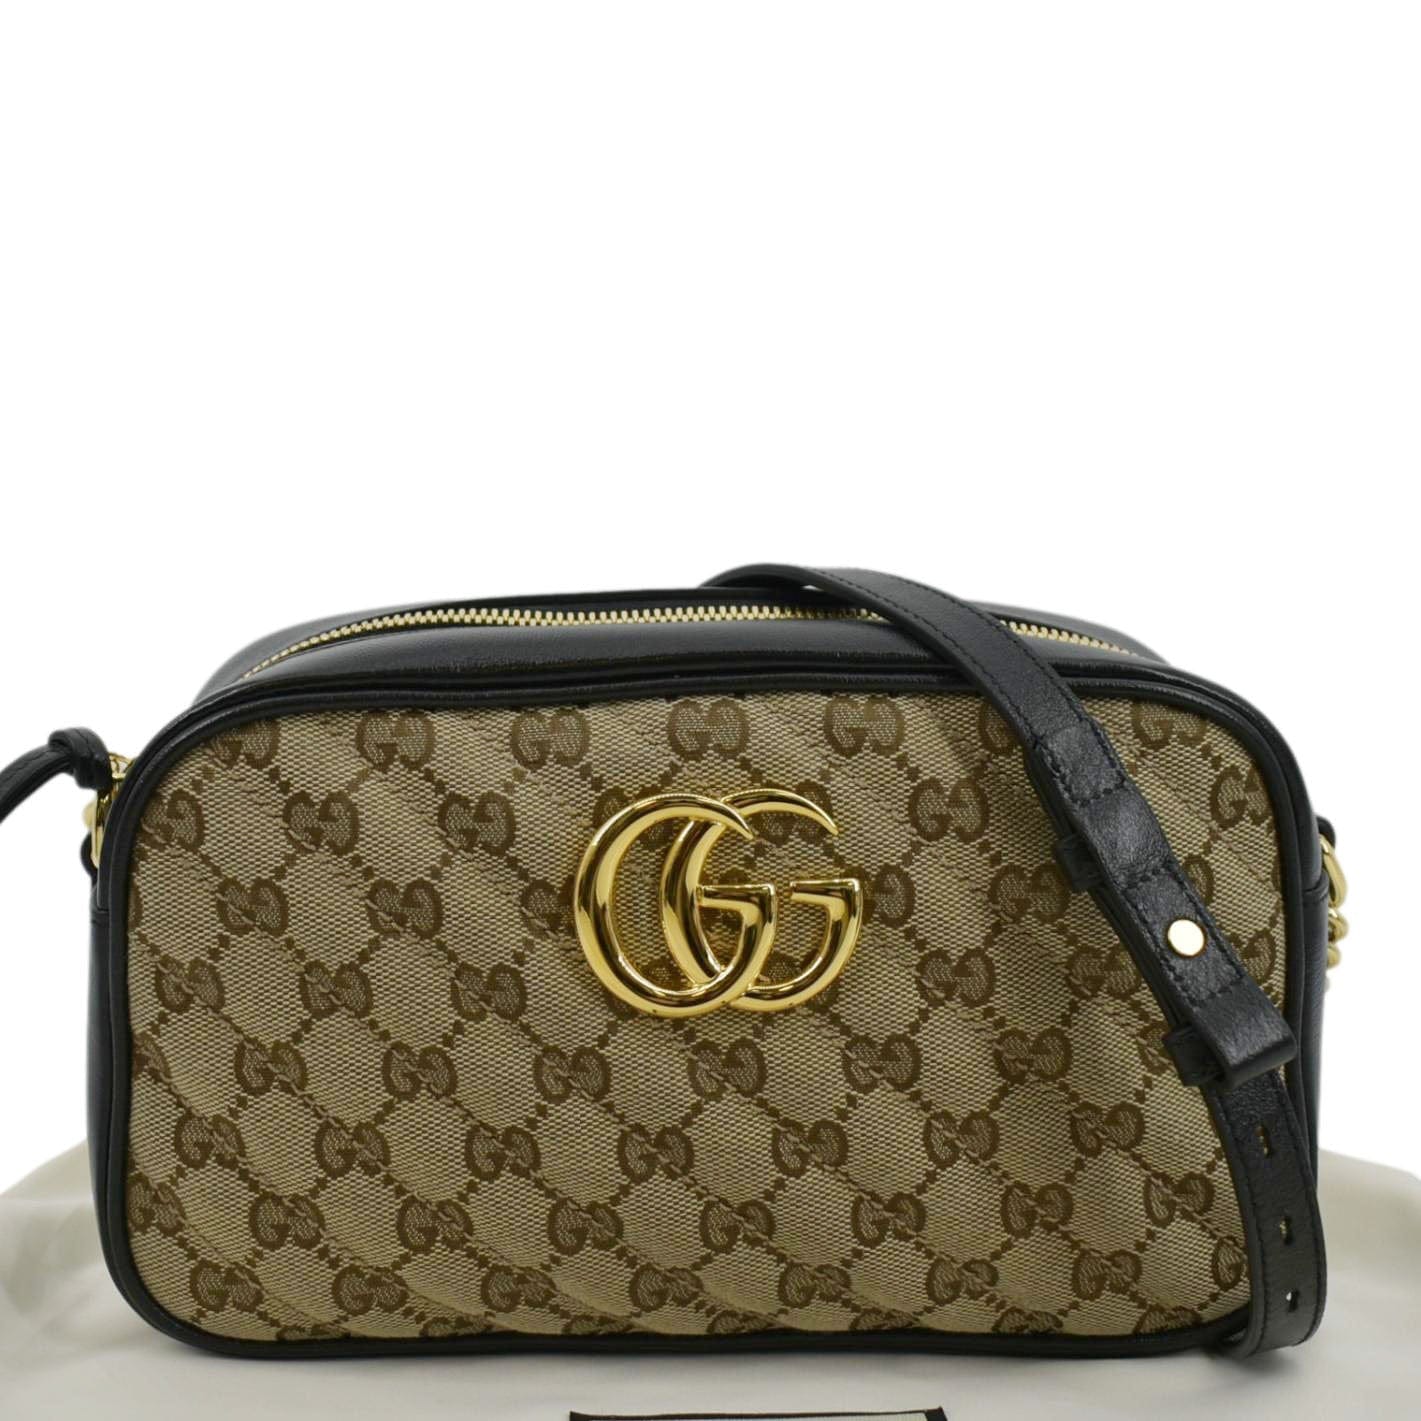 Gucci, Bags, Authentic Gucci Marmont Small Crossbody Bag